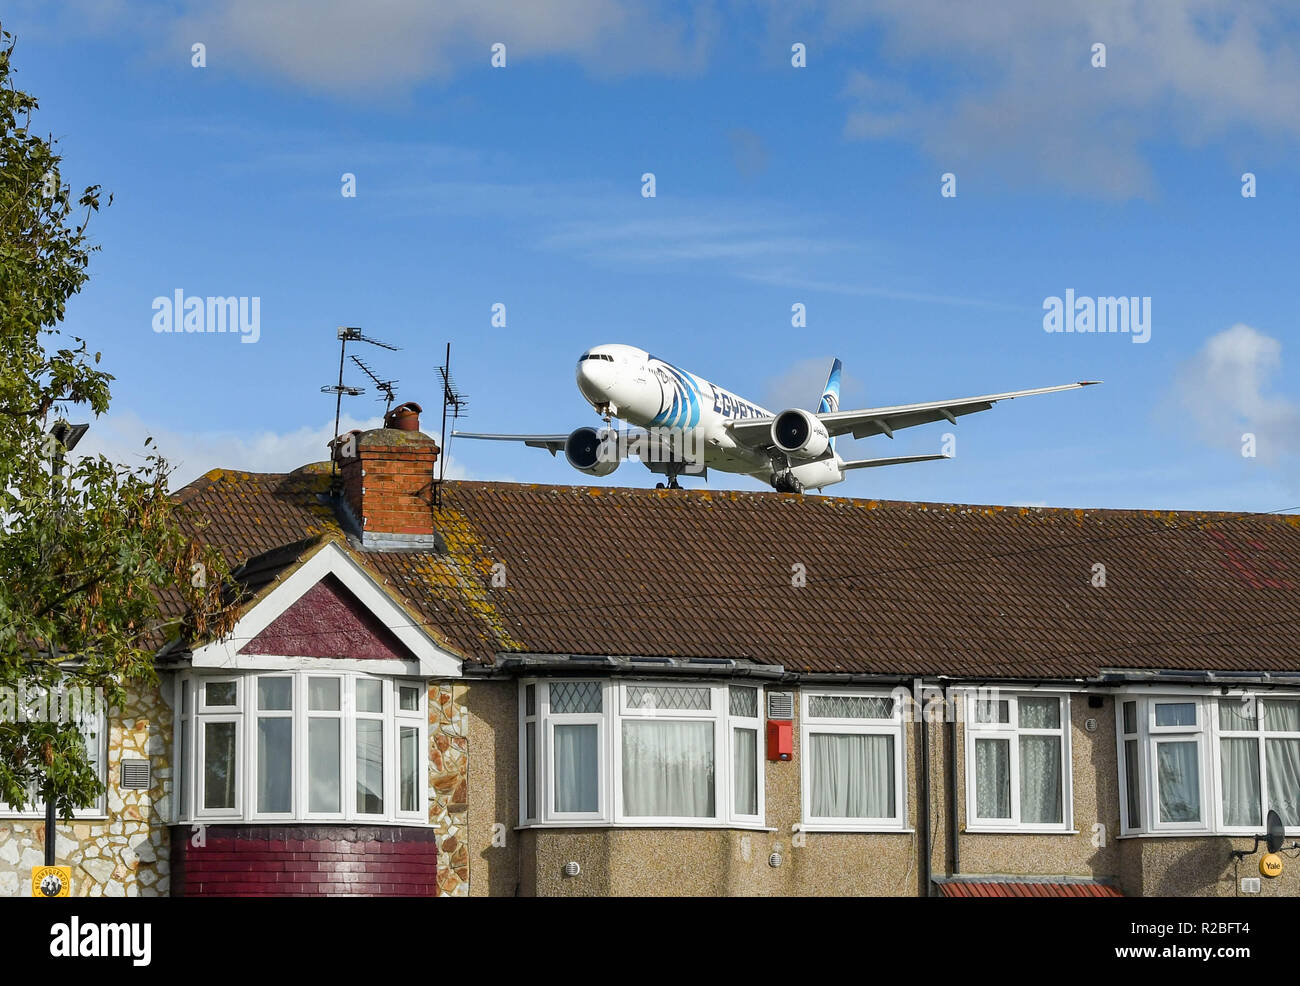 LONDON, ENGLAND - NOVEMBER 2018: Egyptair Boeing 777 jet flying low over rooftops to land at London Heathrow Airport. Stock Photo